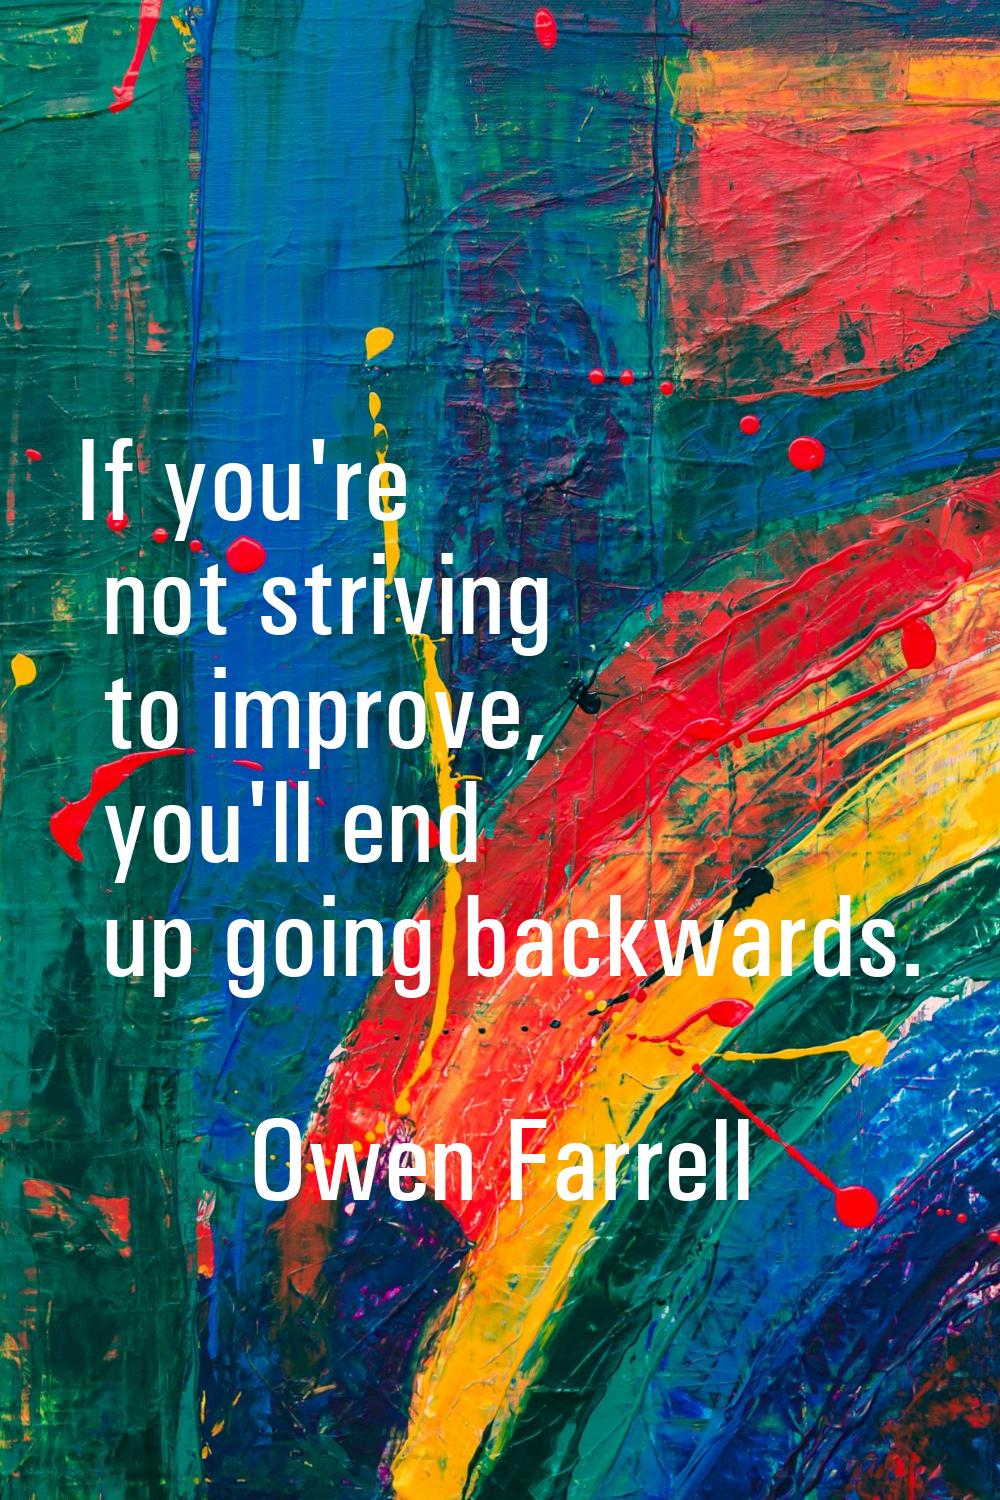 If you're not striving to improve, you'll end up going backwards.